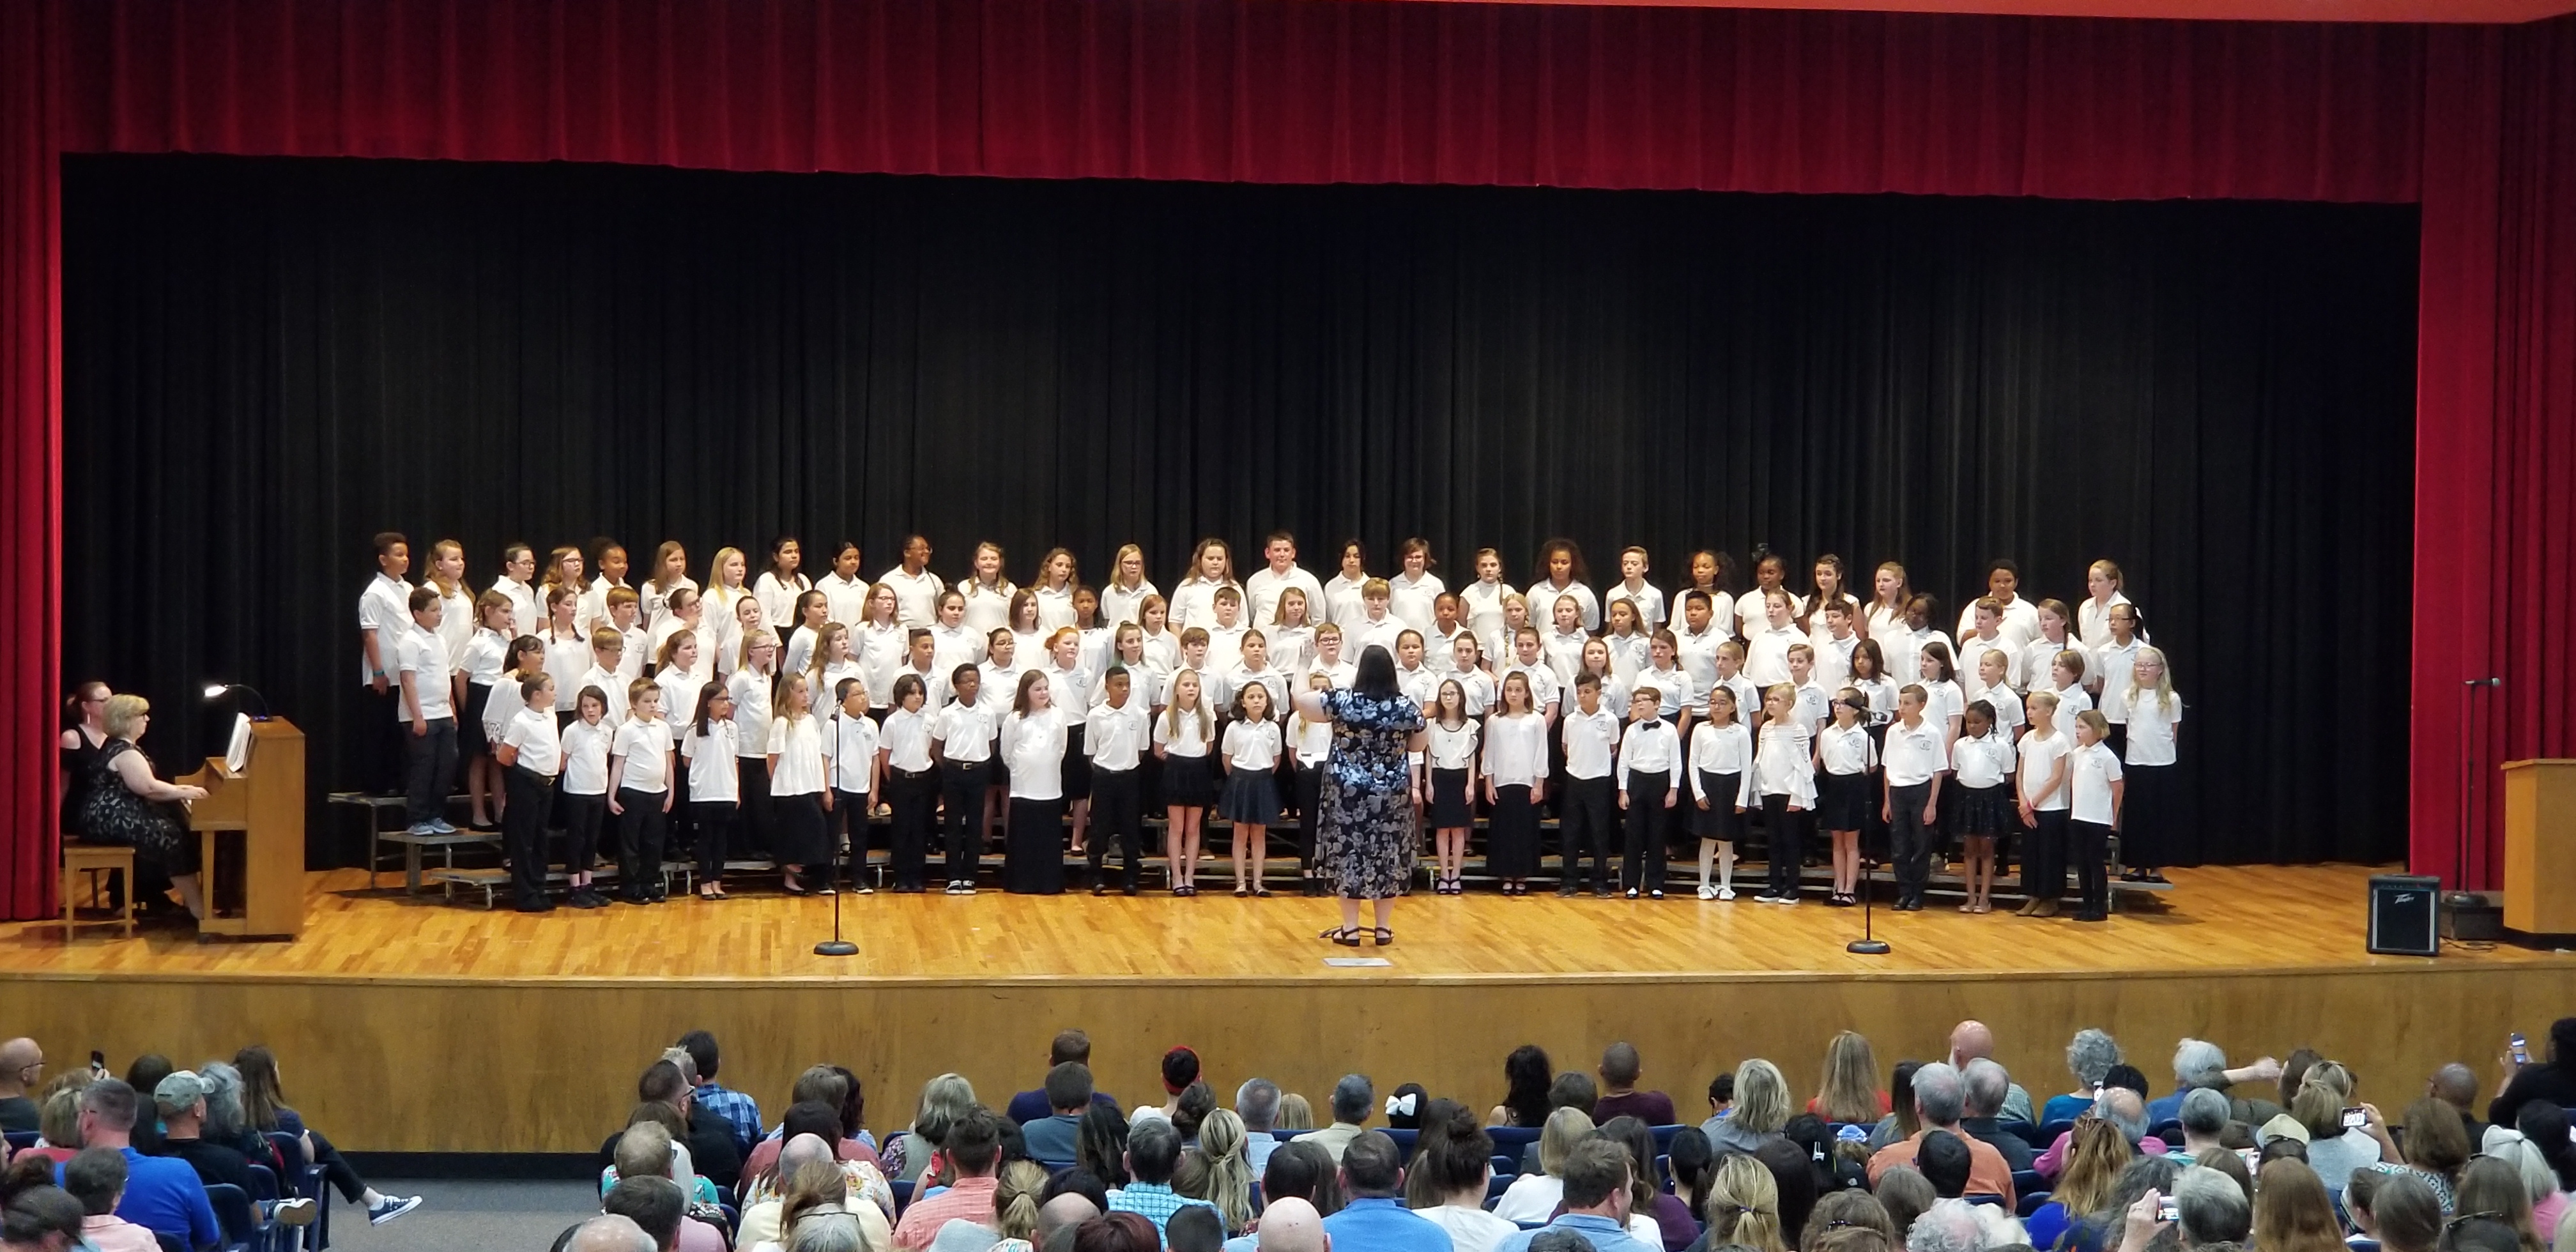 Elementary Honors Choir, Conducted by Christy Bock, April 28, 2019